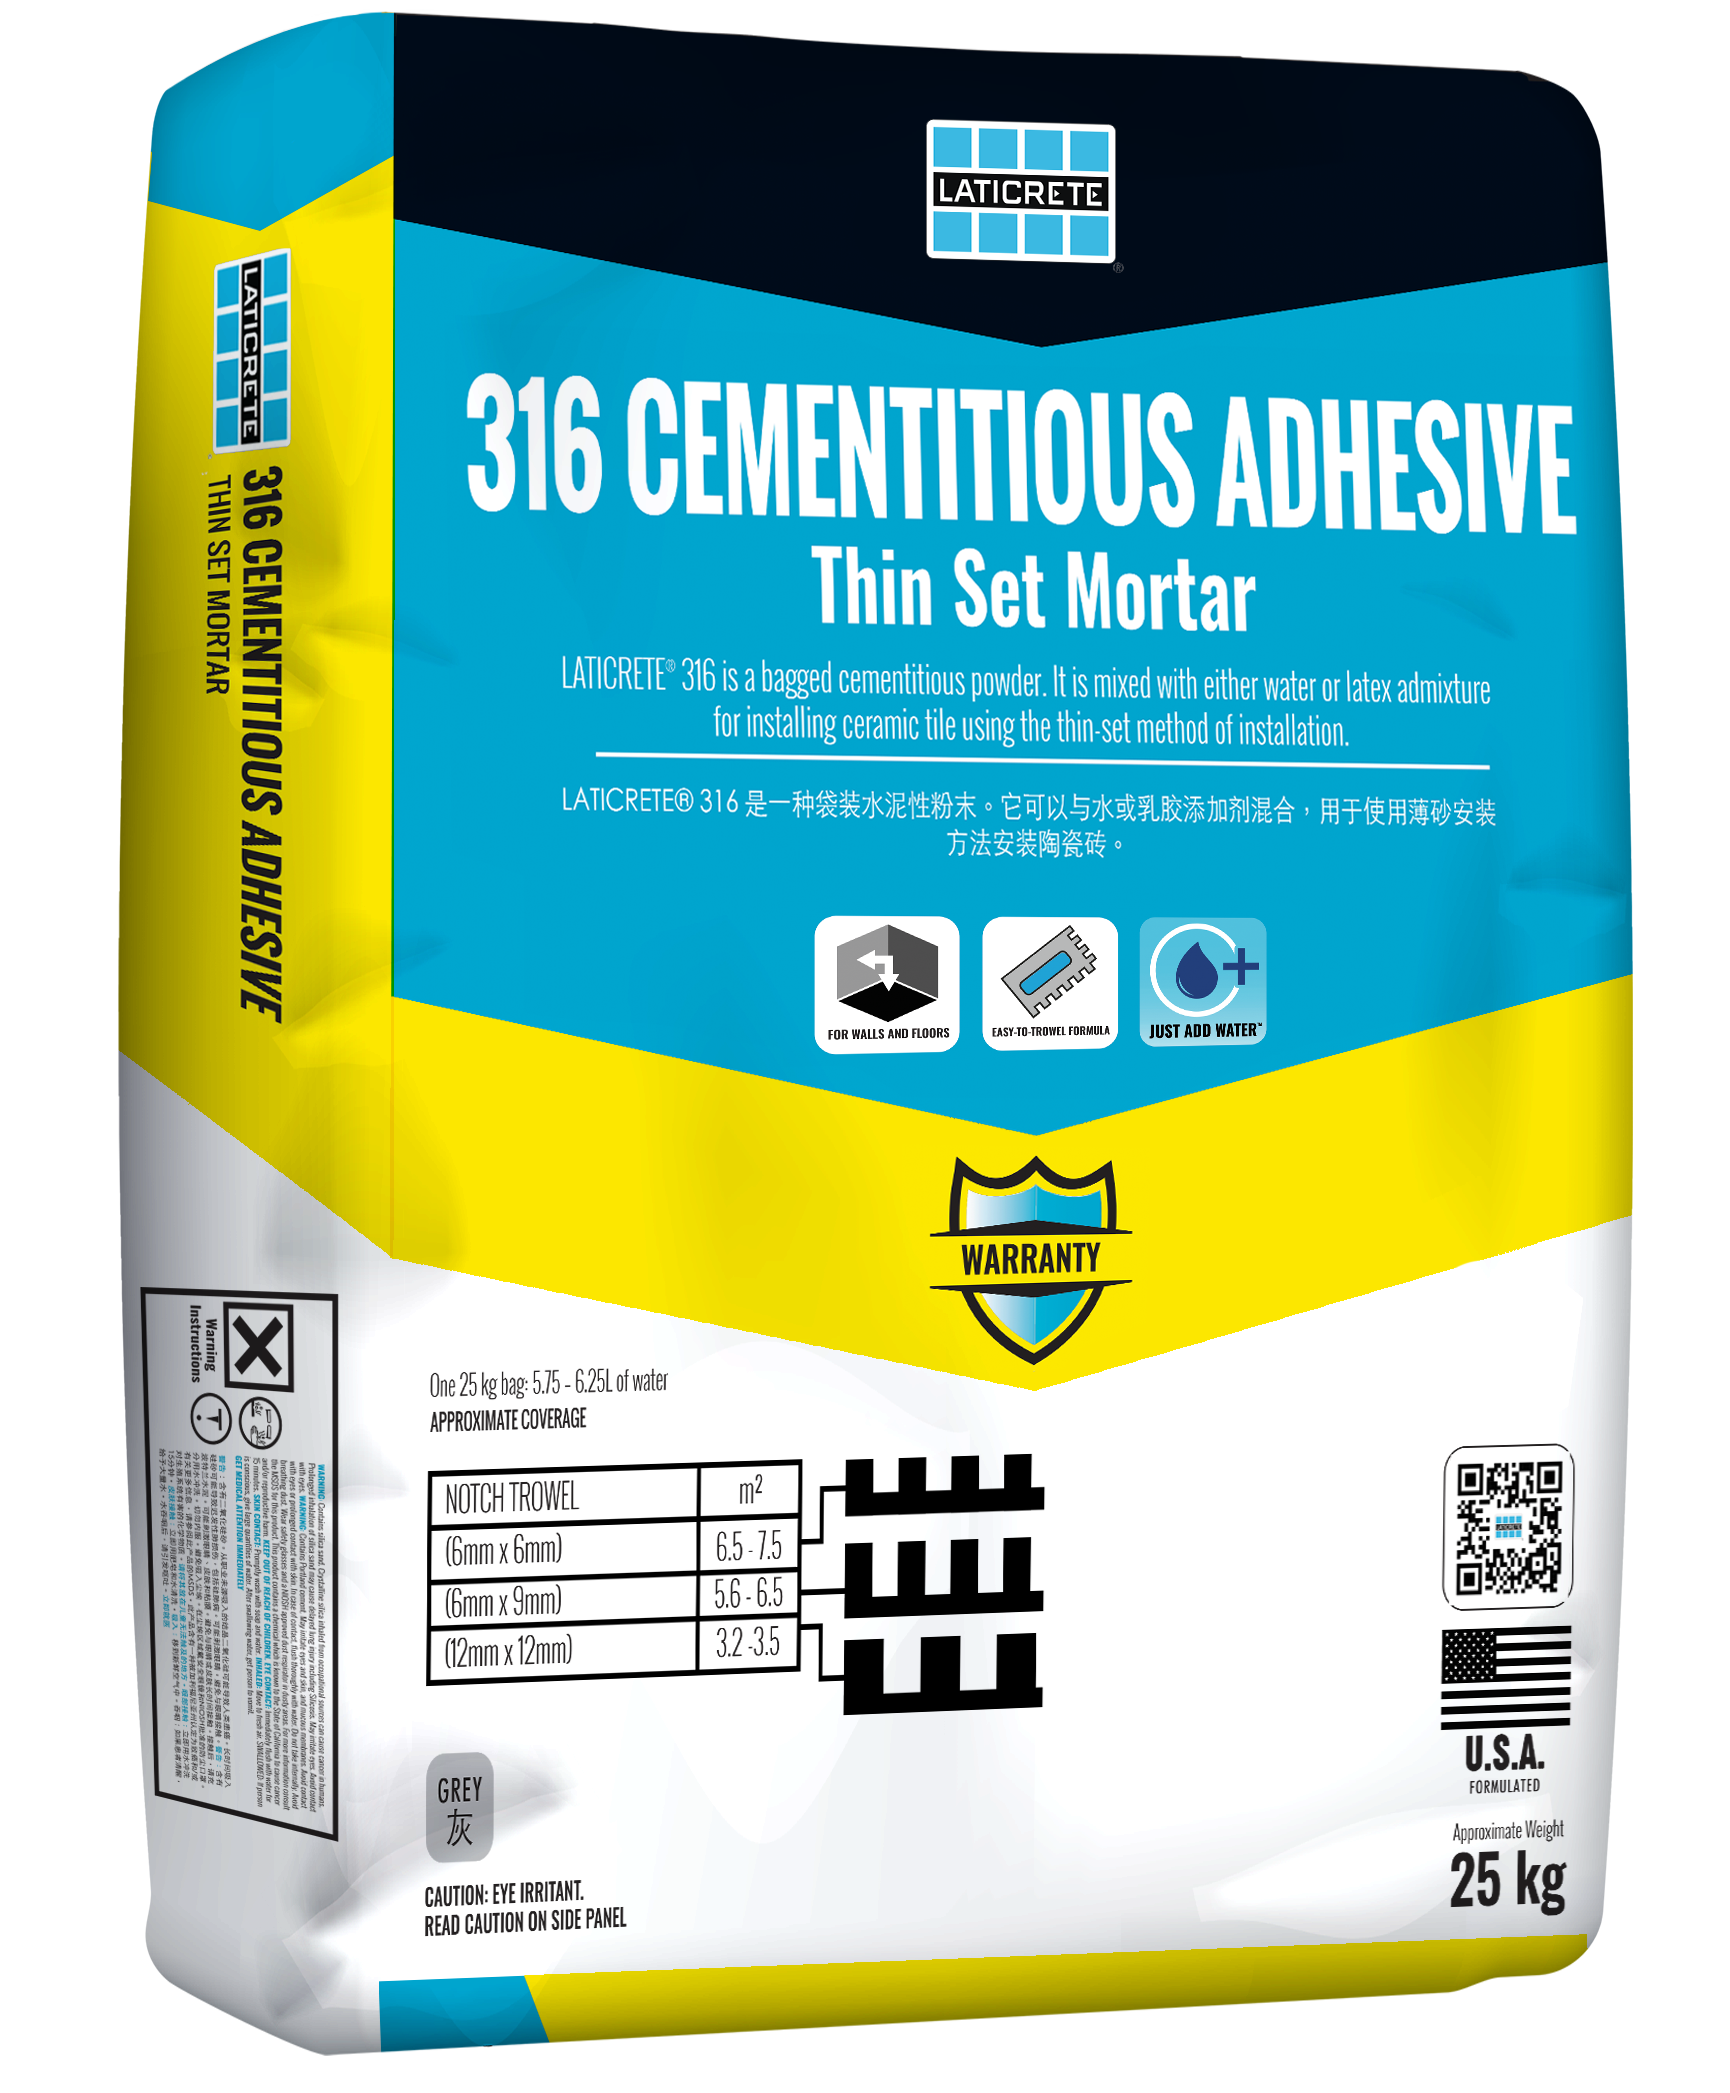 316 Cementitious Adhesive 